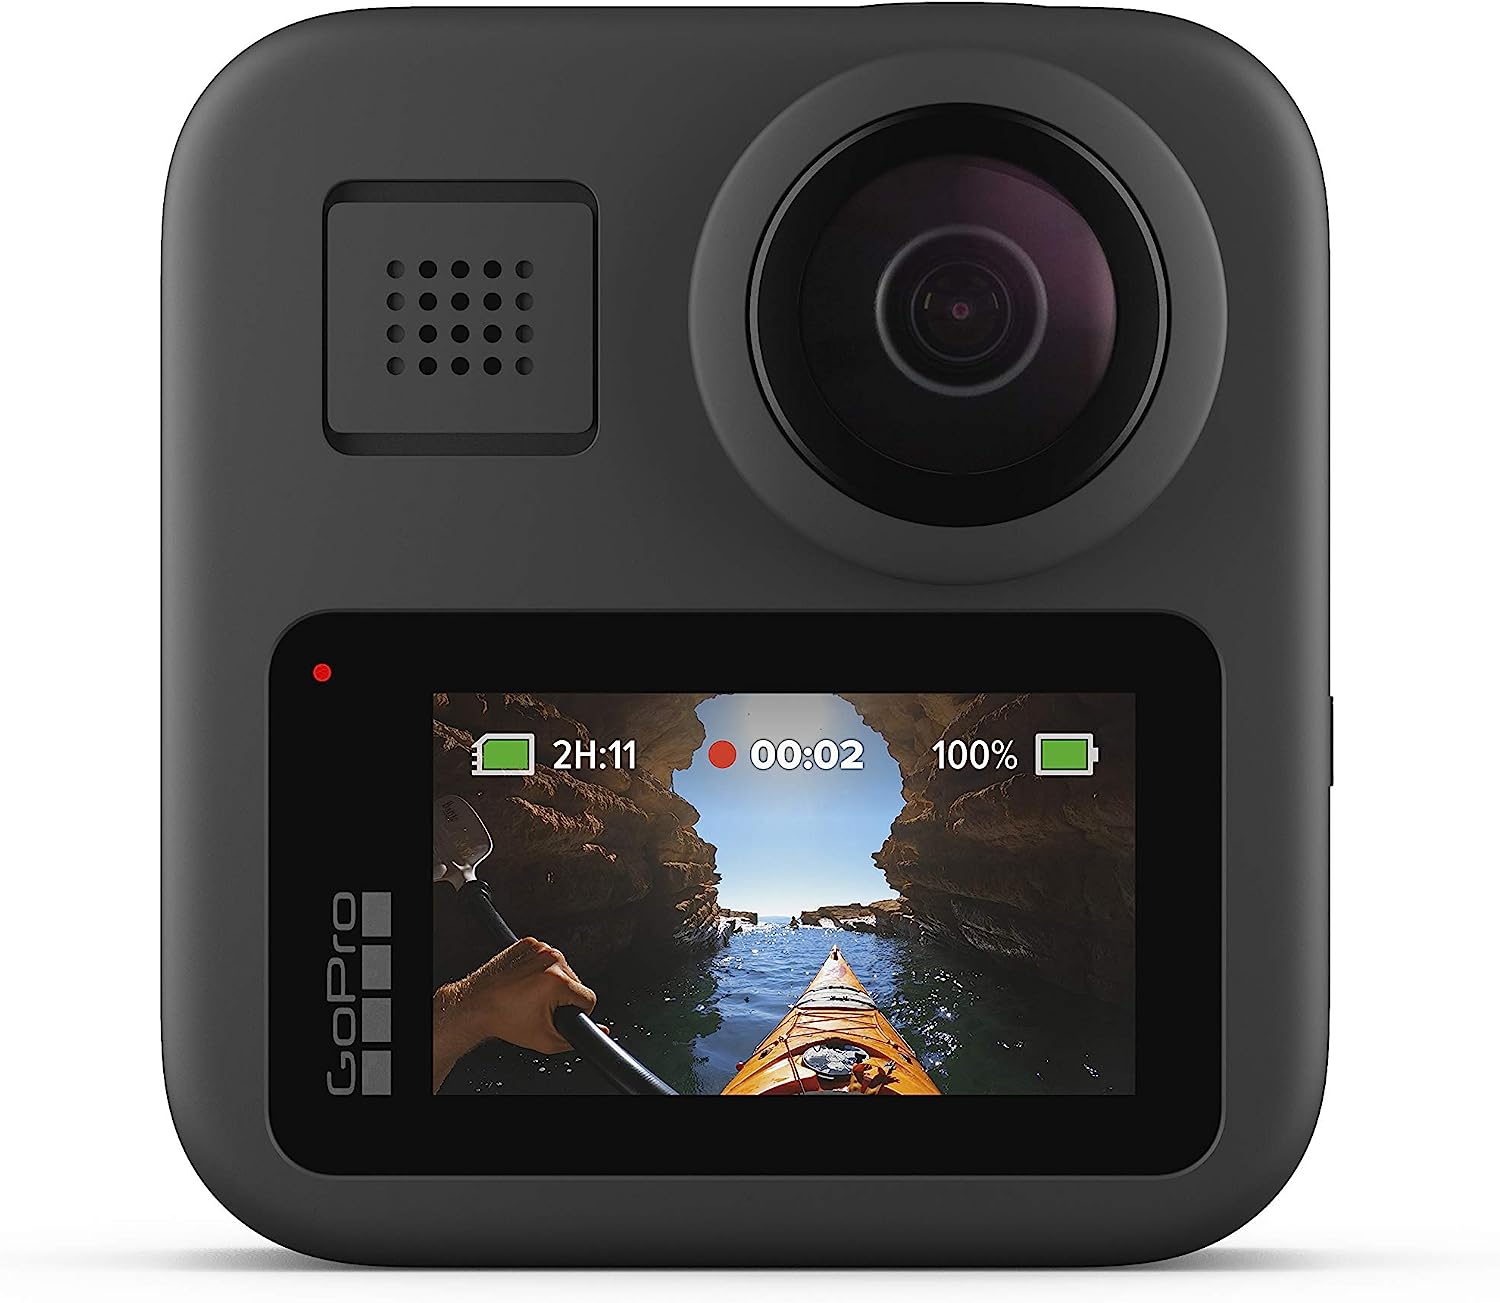 Pictures of a GoPro max